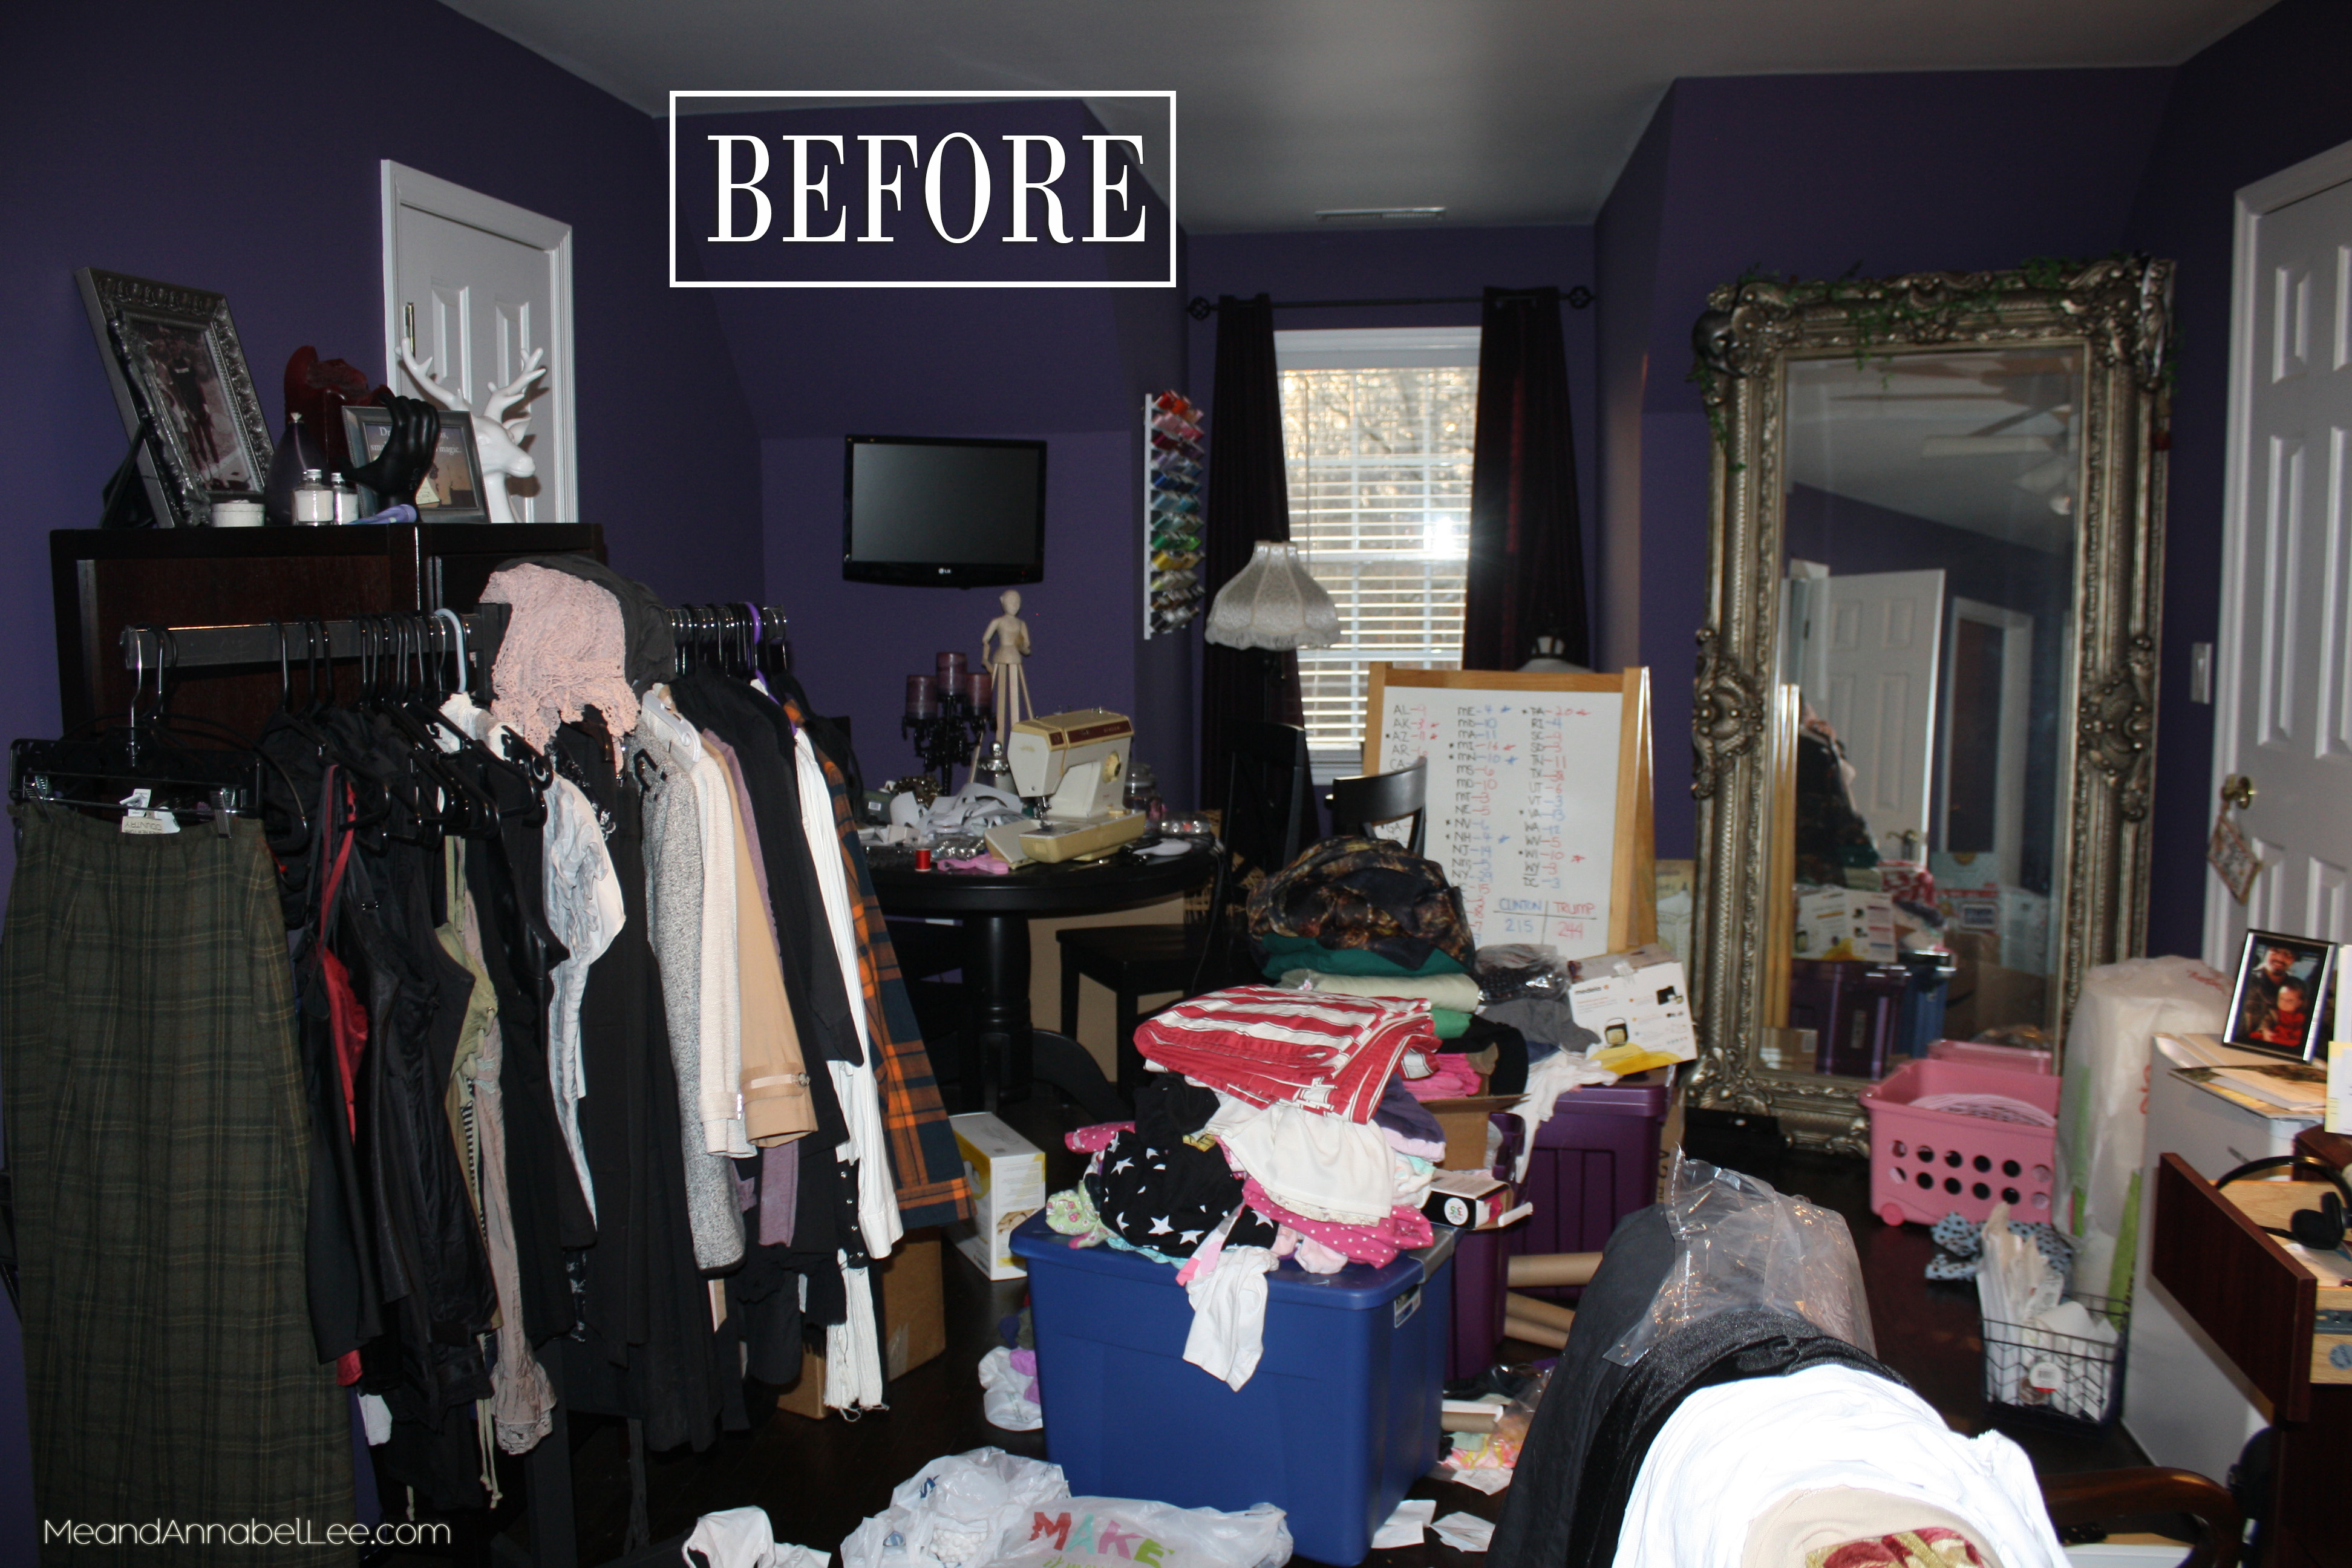 Part 1 (BEFORE) - A Gothic Craft Room and Office Makeover - Goth Blogger Gets a Studio Remodel - www.MeandAnnabelLee.com - Blog for all things Dark, Gothic, Victorian, & Unusual